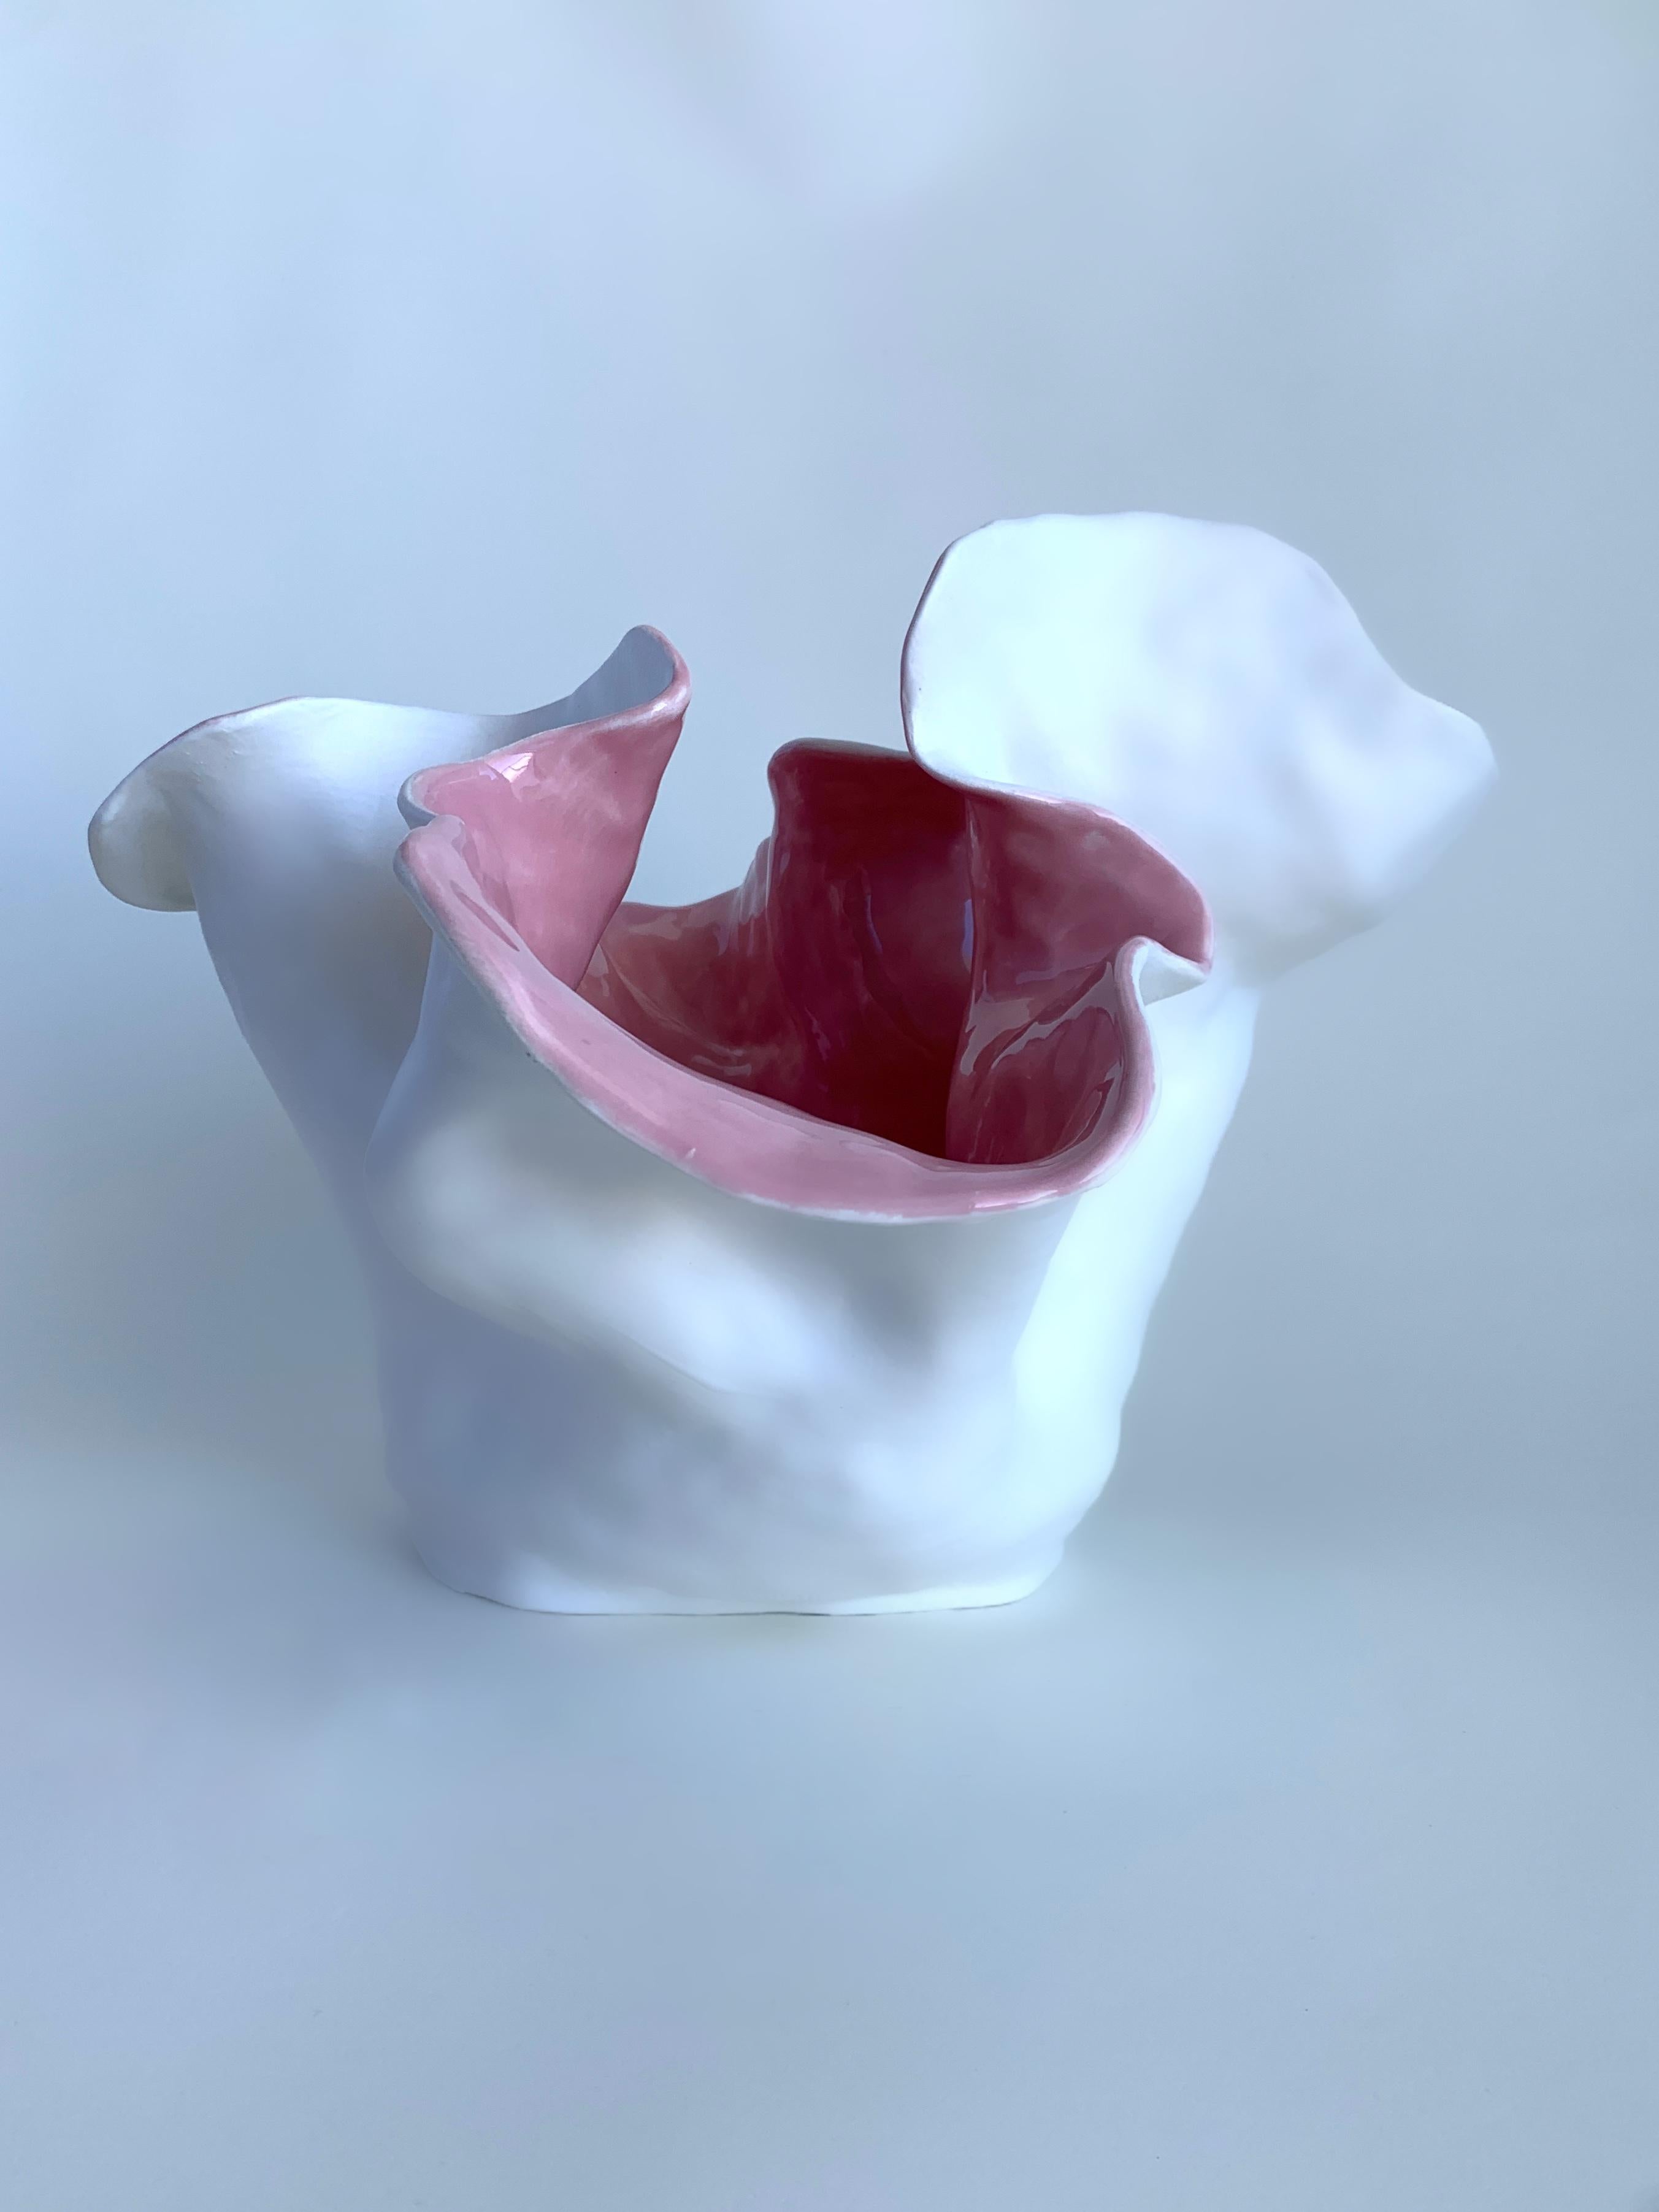 Visceral Blush II, 2020 by Magda von Hanau
From The series Visceral
Clay Sculpture with Glass Glaze
Dimensions: 30.4 H x 33 W cm

The Visceral series delves into the intricate relationship between the mind and the body, specifically focusing on the